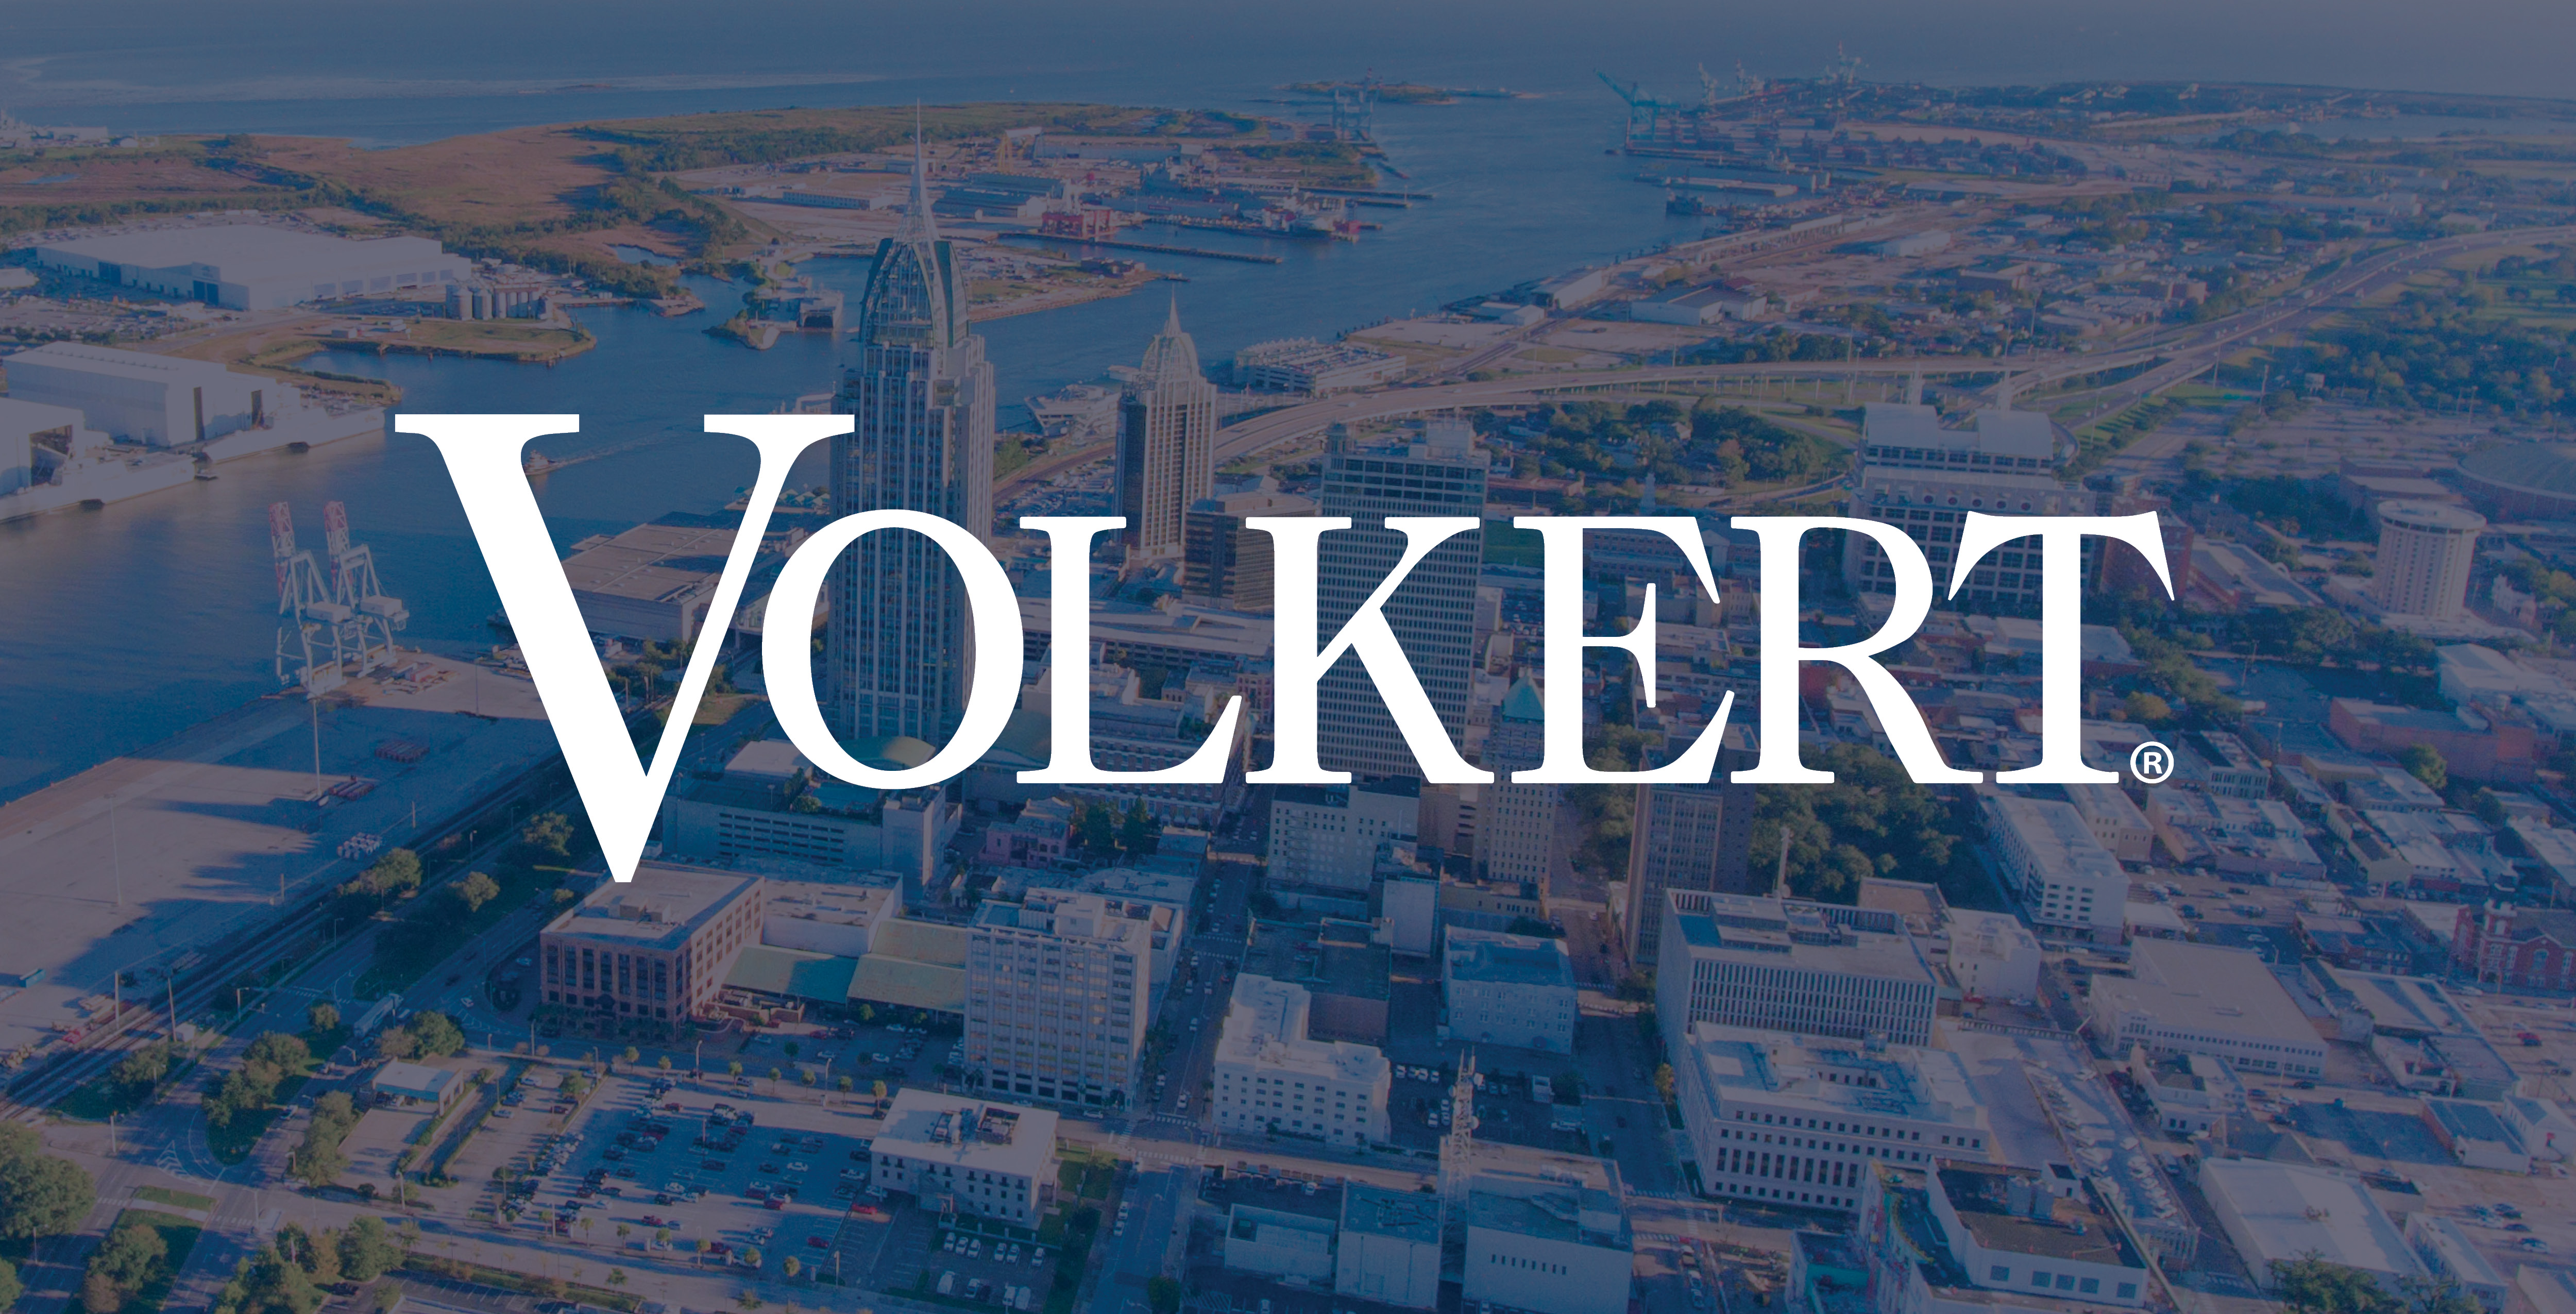 VOLKERT NAMES THOMAS HAND NEW CEO